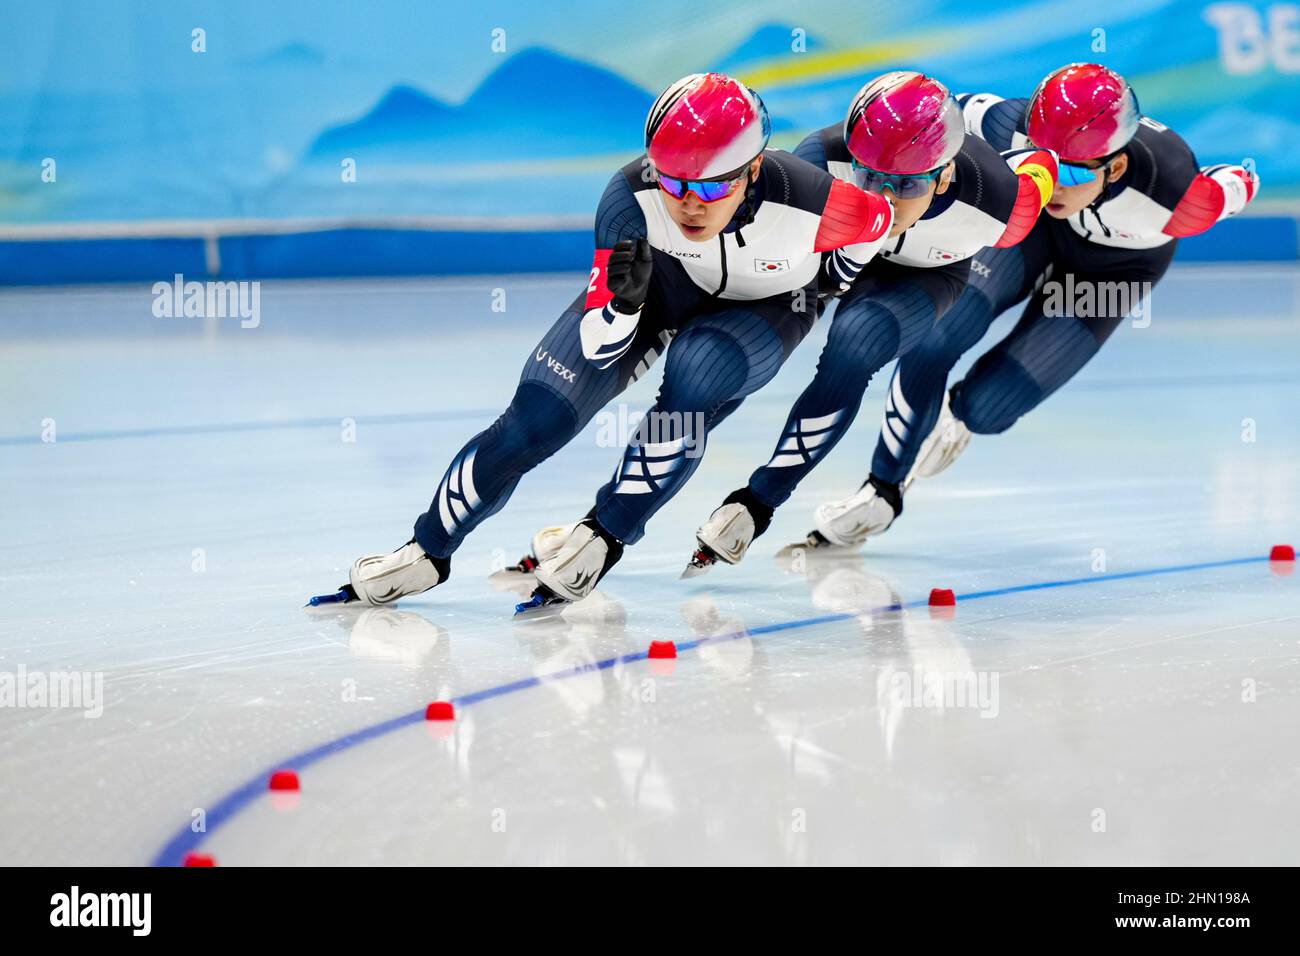 Beijing, China. 13th Feb, 2022. BEIJING, CHINA - FEBRUARY 13: Minseok Kim of South Korea, Seung Hoon Lee of South Korea, Jae Won Chung of South Korea competing at the Men's Team Pursuit Quarterfinals during the Beijing 2022 Olympic Games at the National Speed Skating Oval on February 13, 2022 in Beijing, China (Photo by Douwe Bijlsma/Orange Pictures) NOCNSF Credit: Orange Pics BV/Alamy Live News Stock Photo